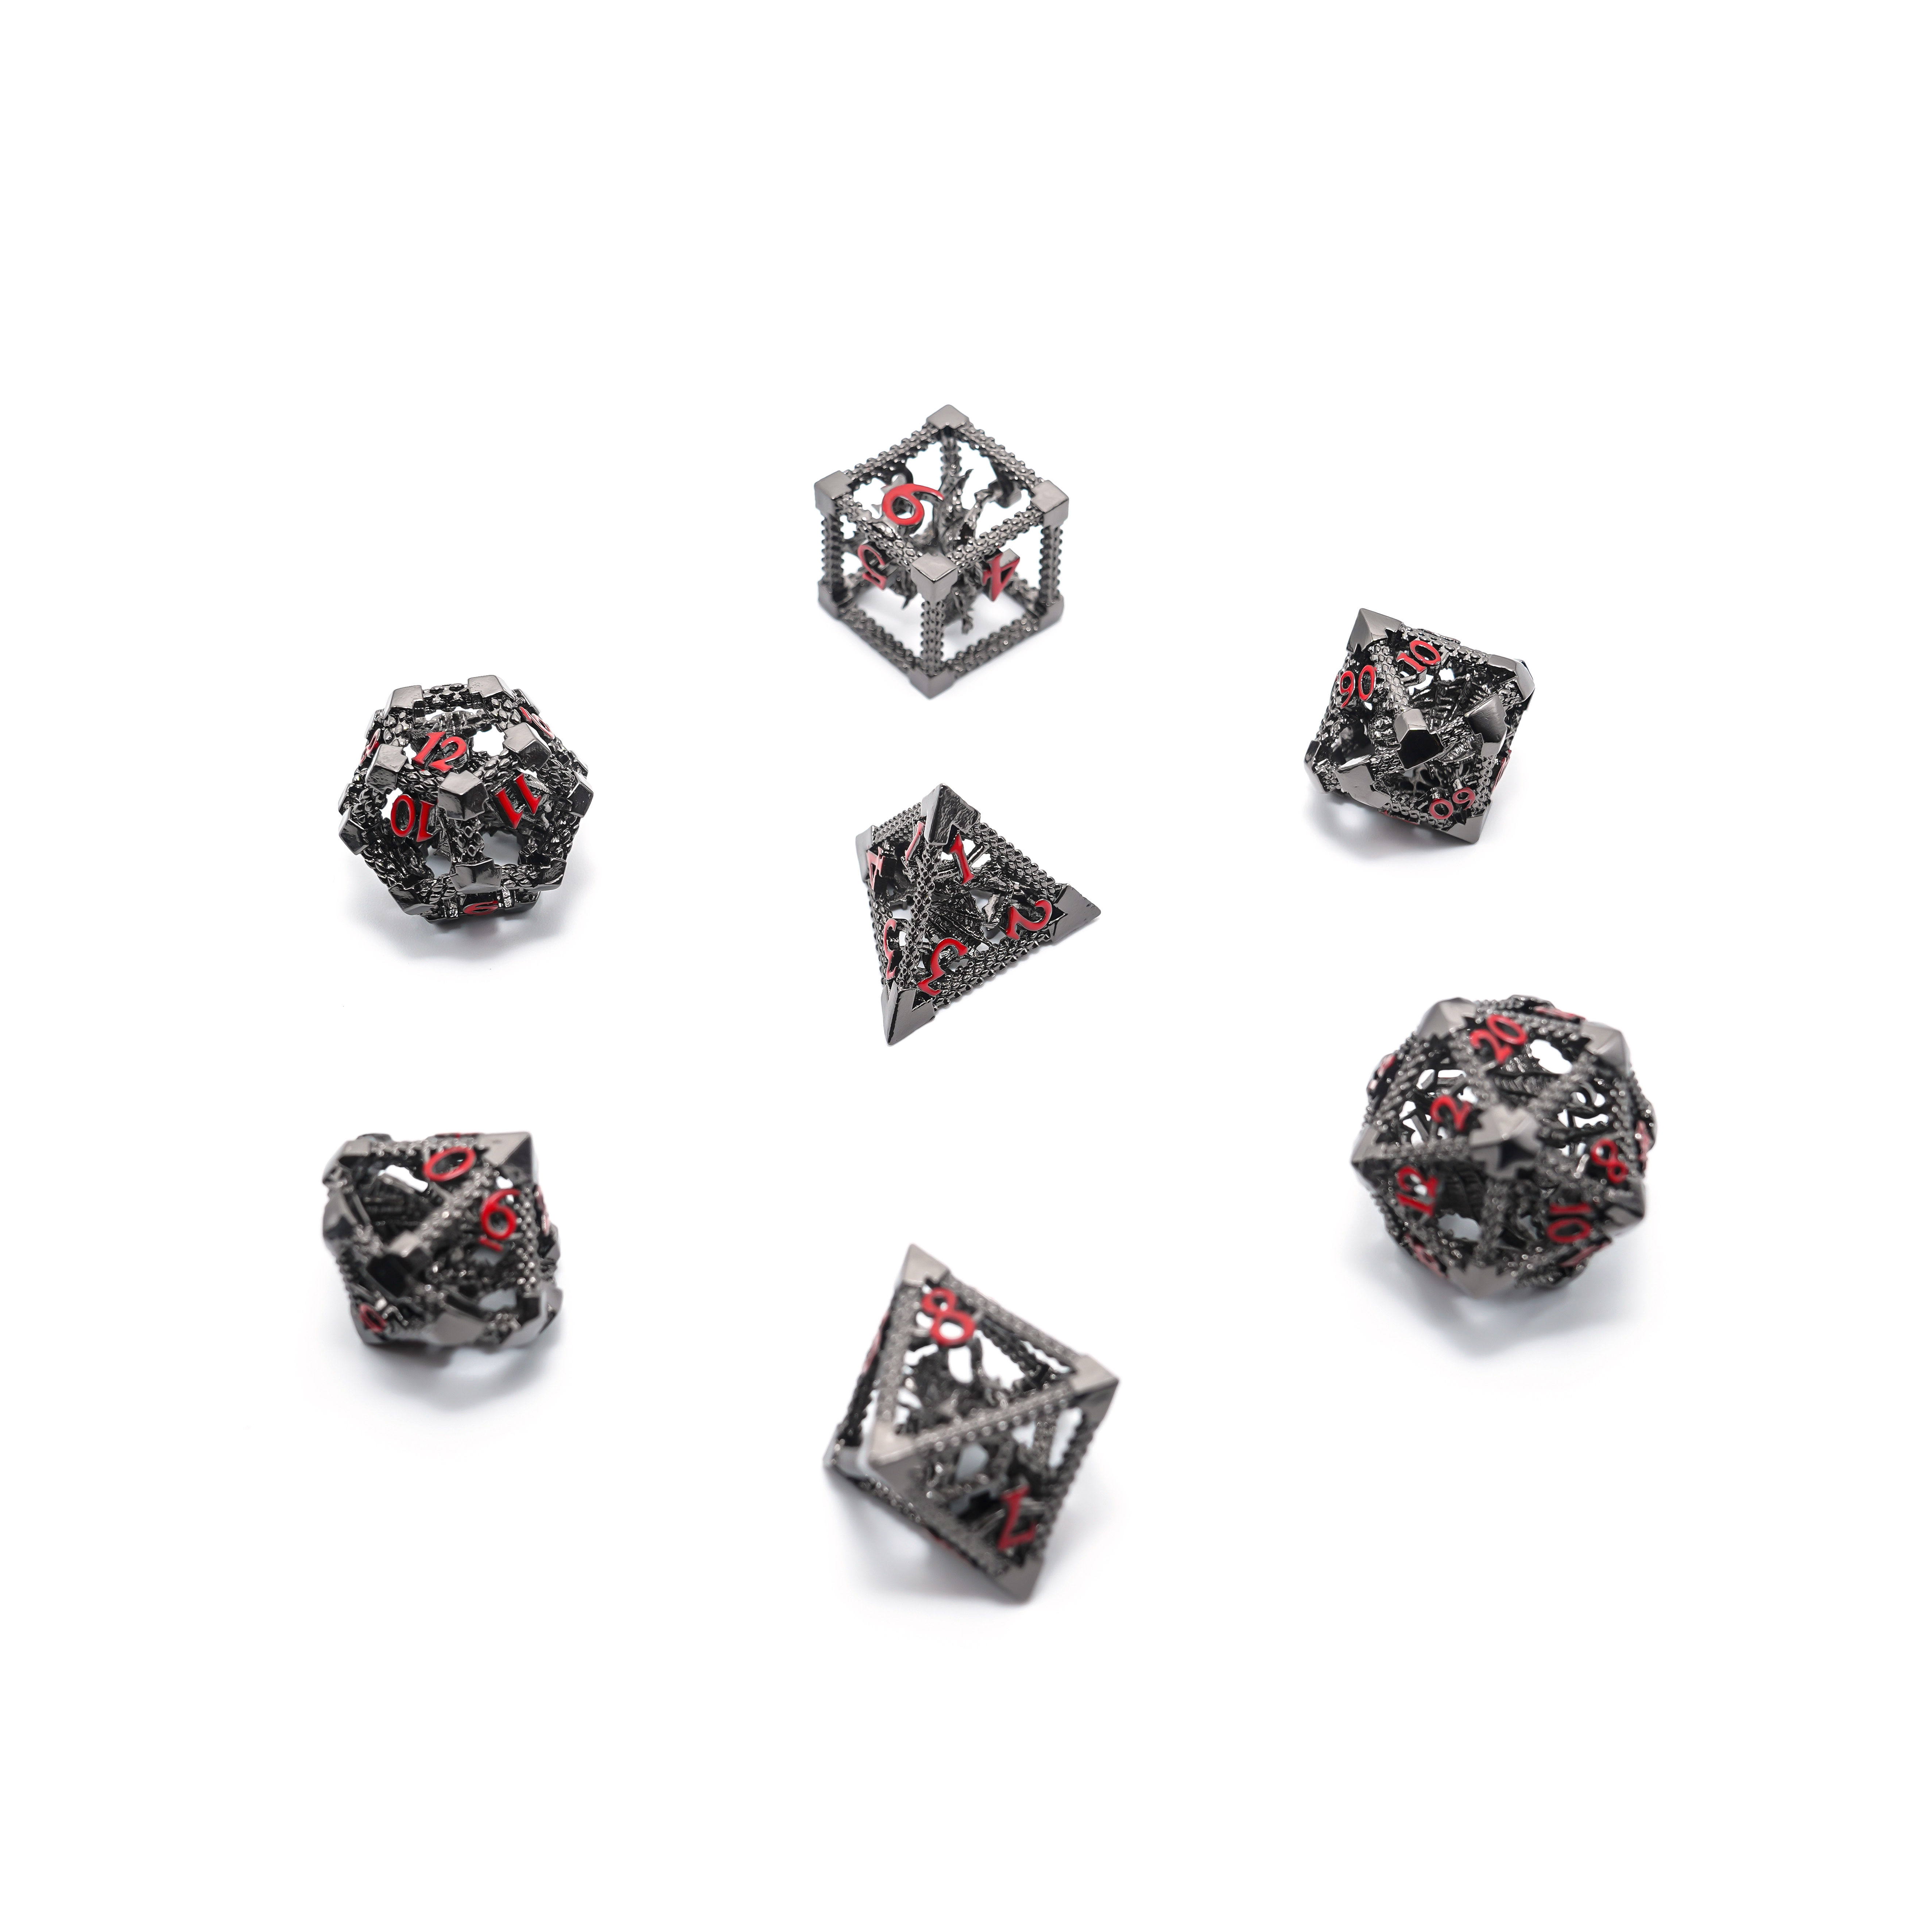 Premium Metal Hollow Dragon Board <a href='/game-dice/'>Game Dice</a> | Factory Direct | Exquisite Craftsmanship